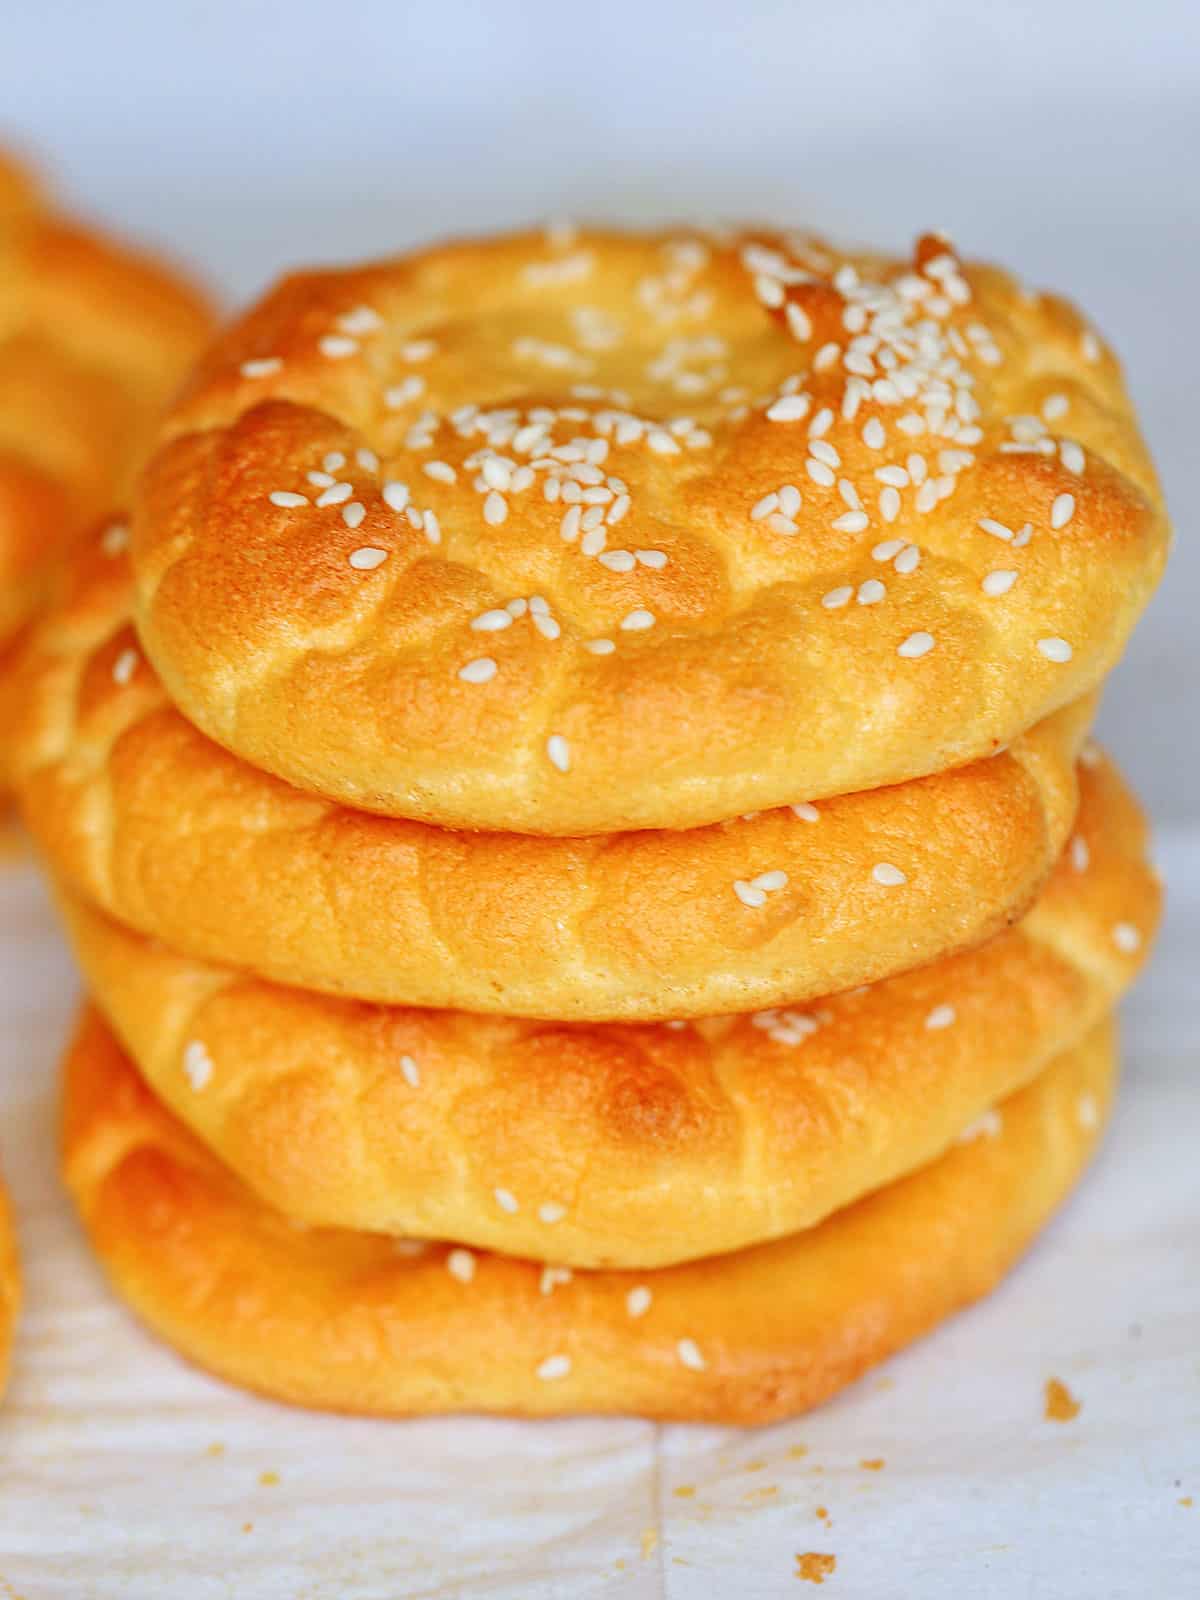 Four pieces of cloud bread, stacked.